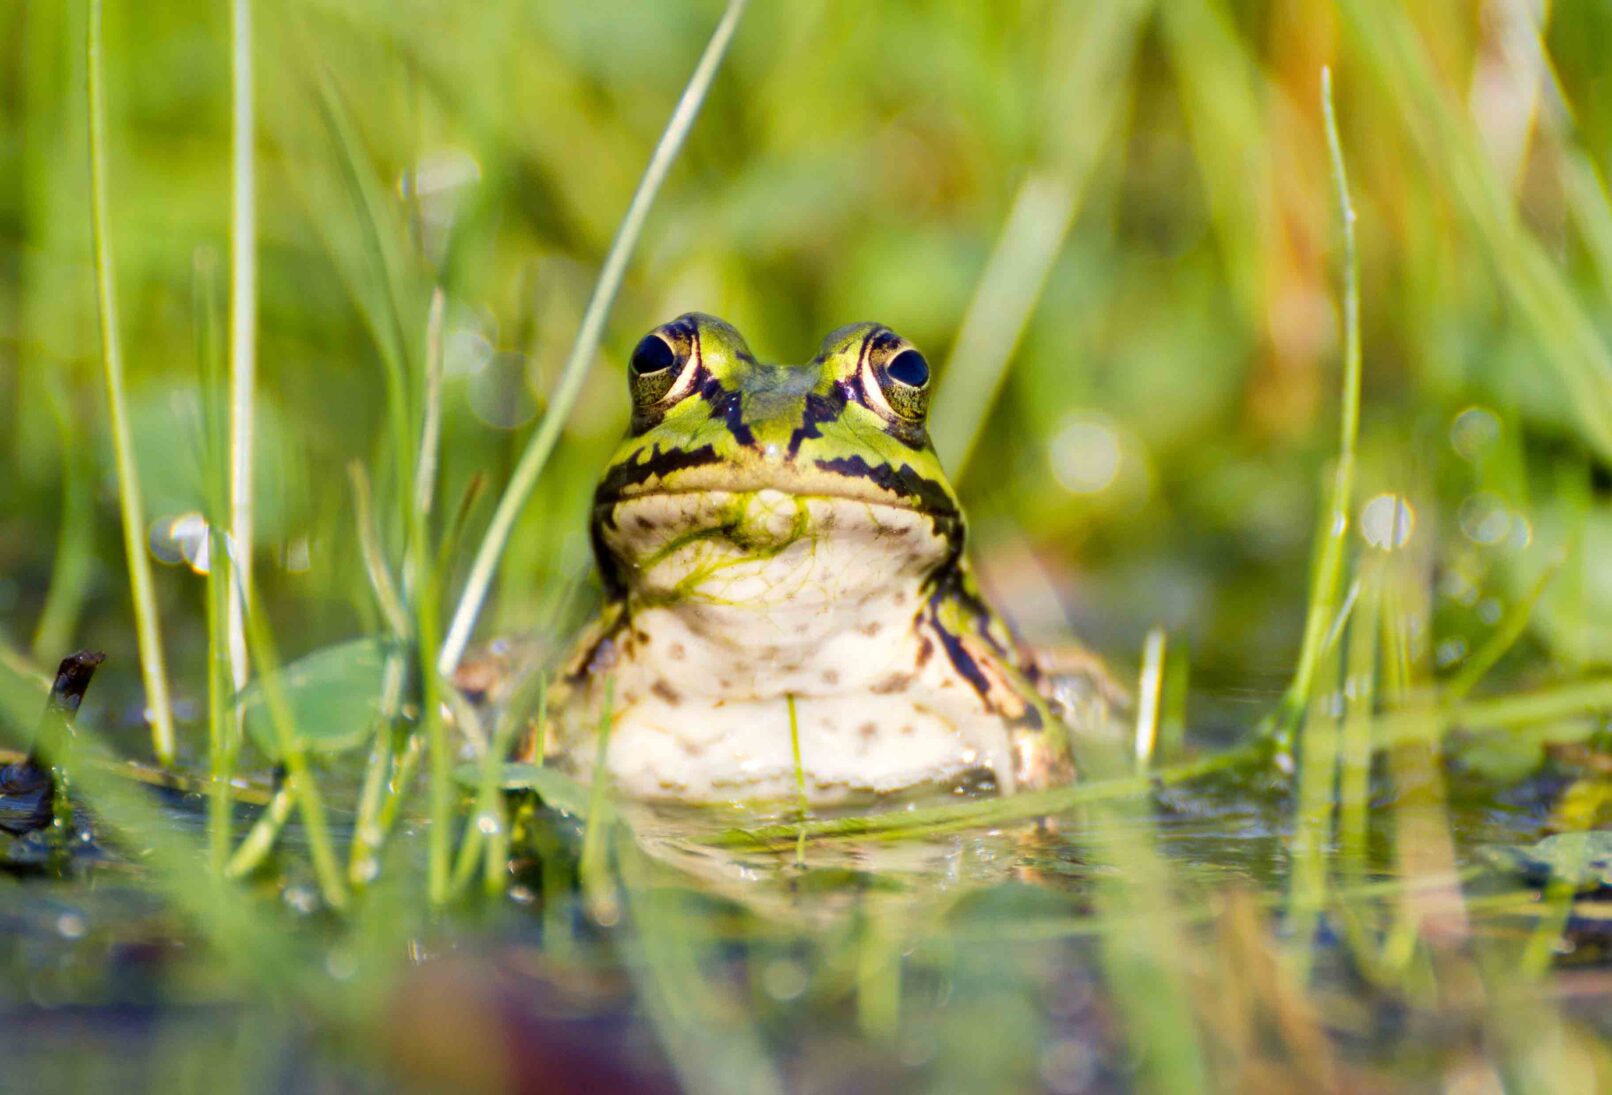 A frog in a pond